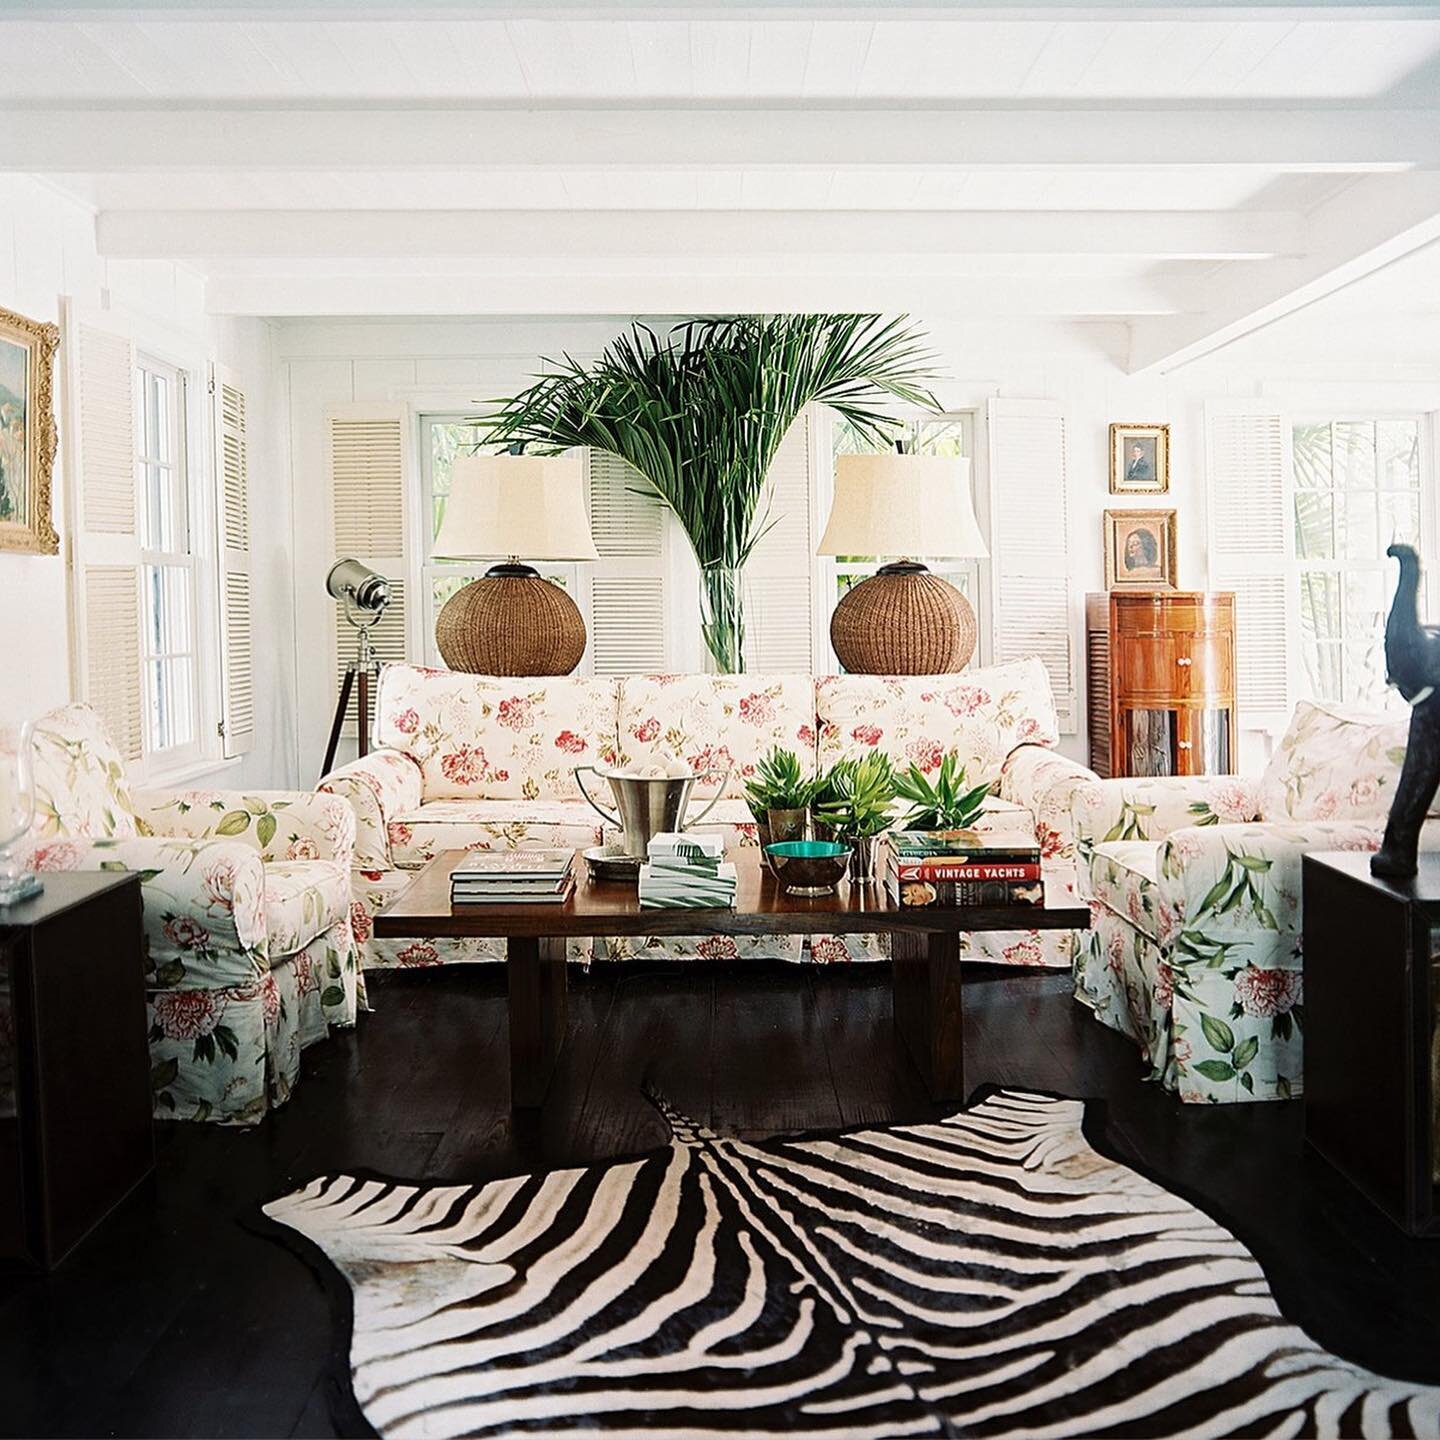 King&rsquo;s Treat&mdash;one of several Harbour Island homes belonging to designer @davidflintwood and his partner, @indiahicksstyle &mdash;is an easygoing homage to island style. &ldquo;I wanted the furnishings to evoke a particular kind of nostalgi